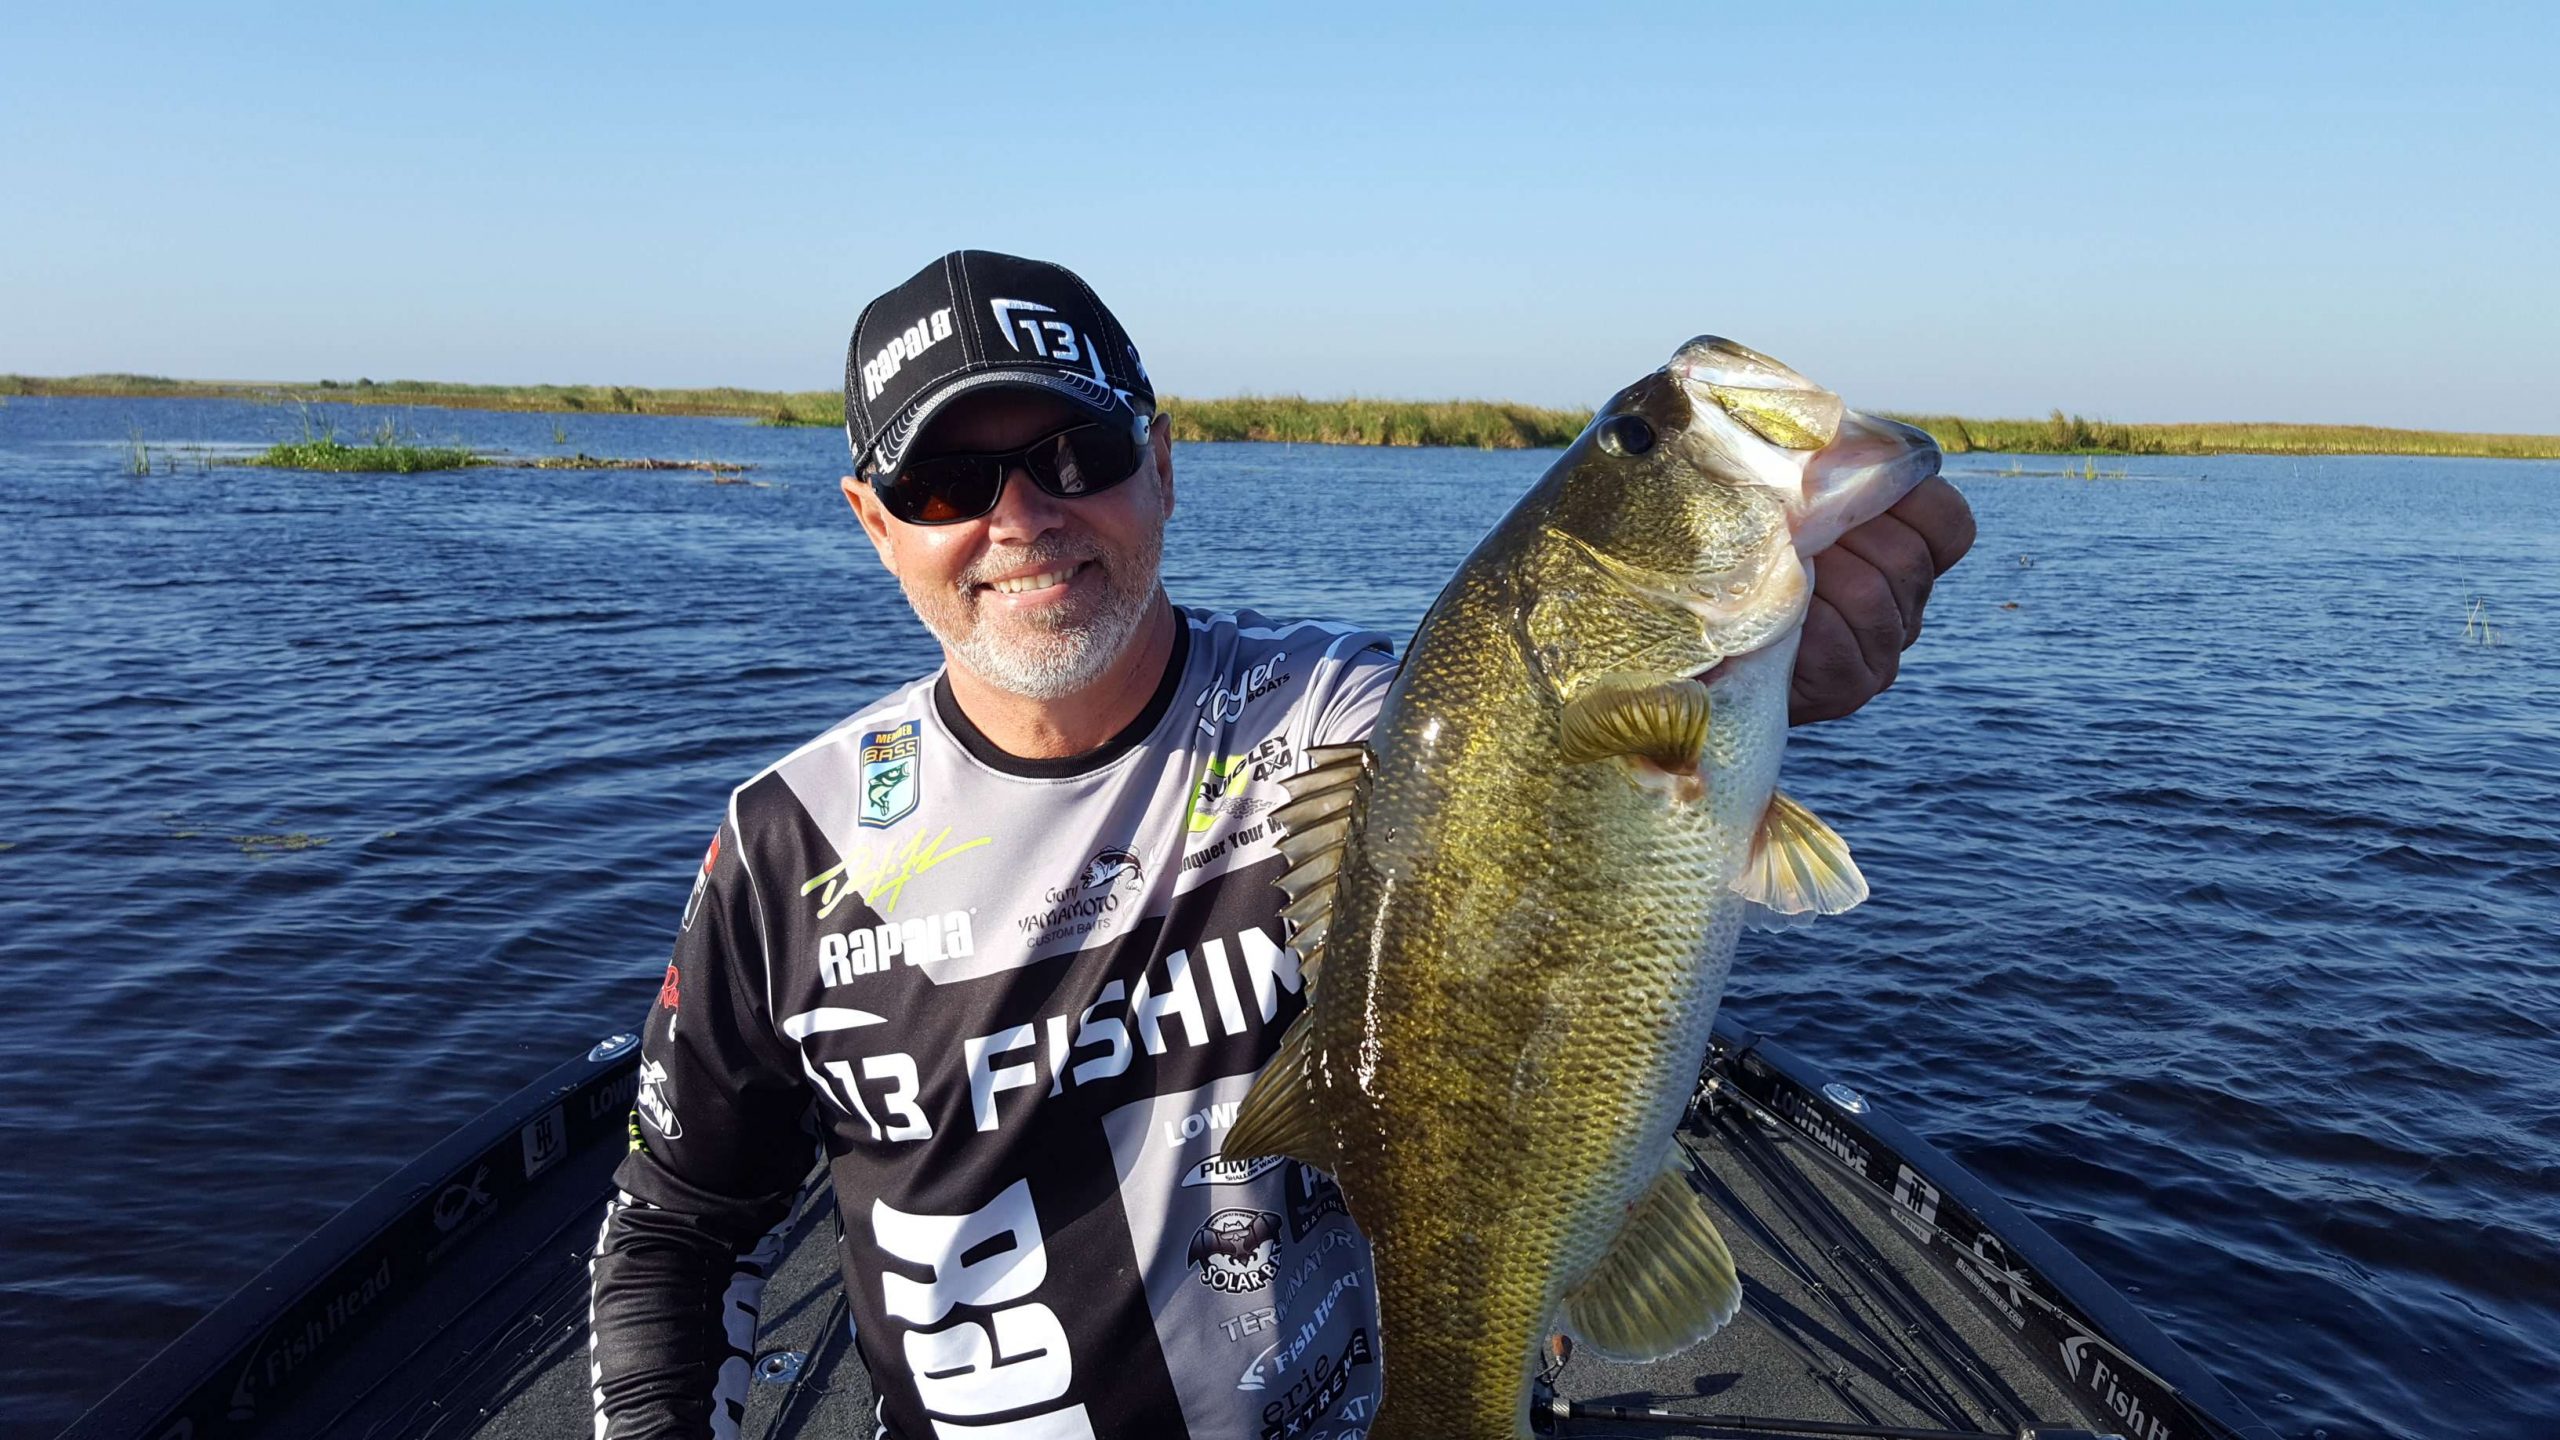 This fish puts a smile on Dave Lefebre's face.